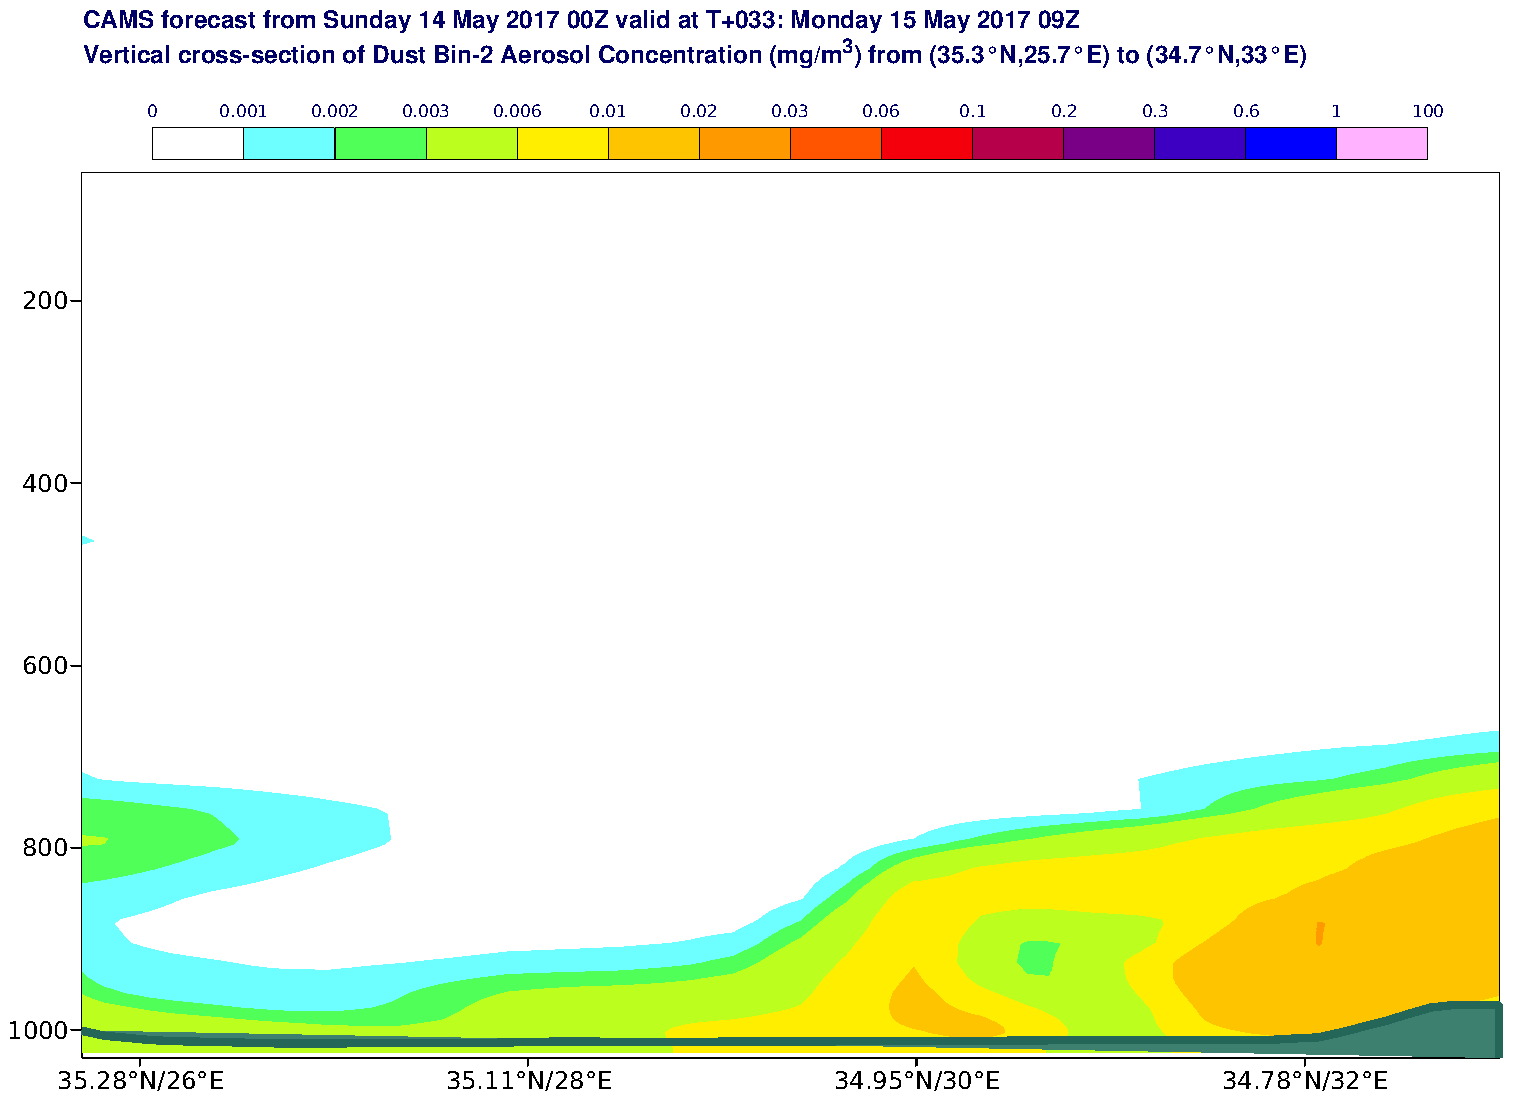 Vertical cross-section of Dust Bin-2 Aerosol Concentration (mg/m3) valid at T33 - 2017-05-15 09:00